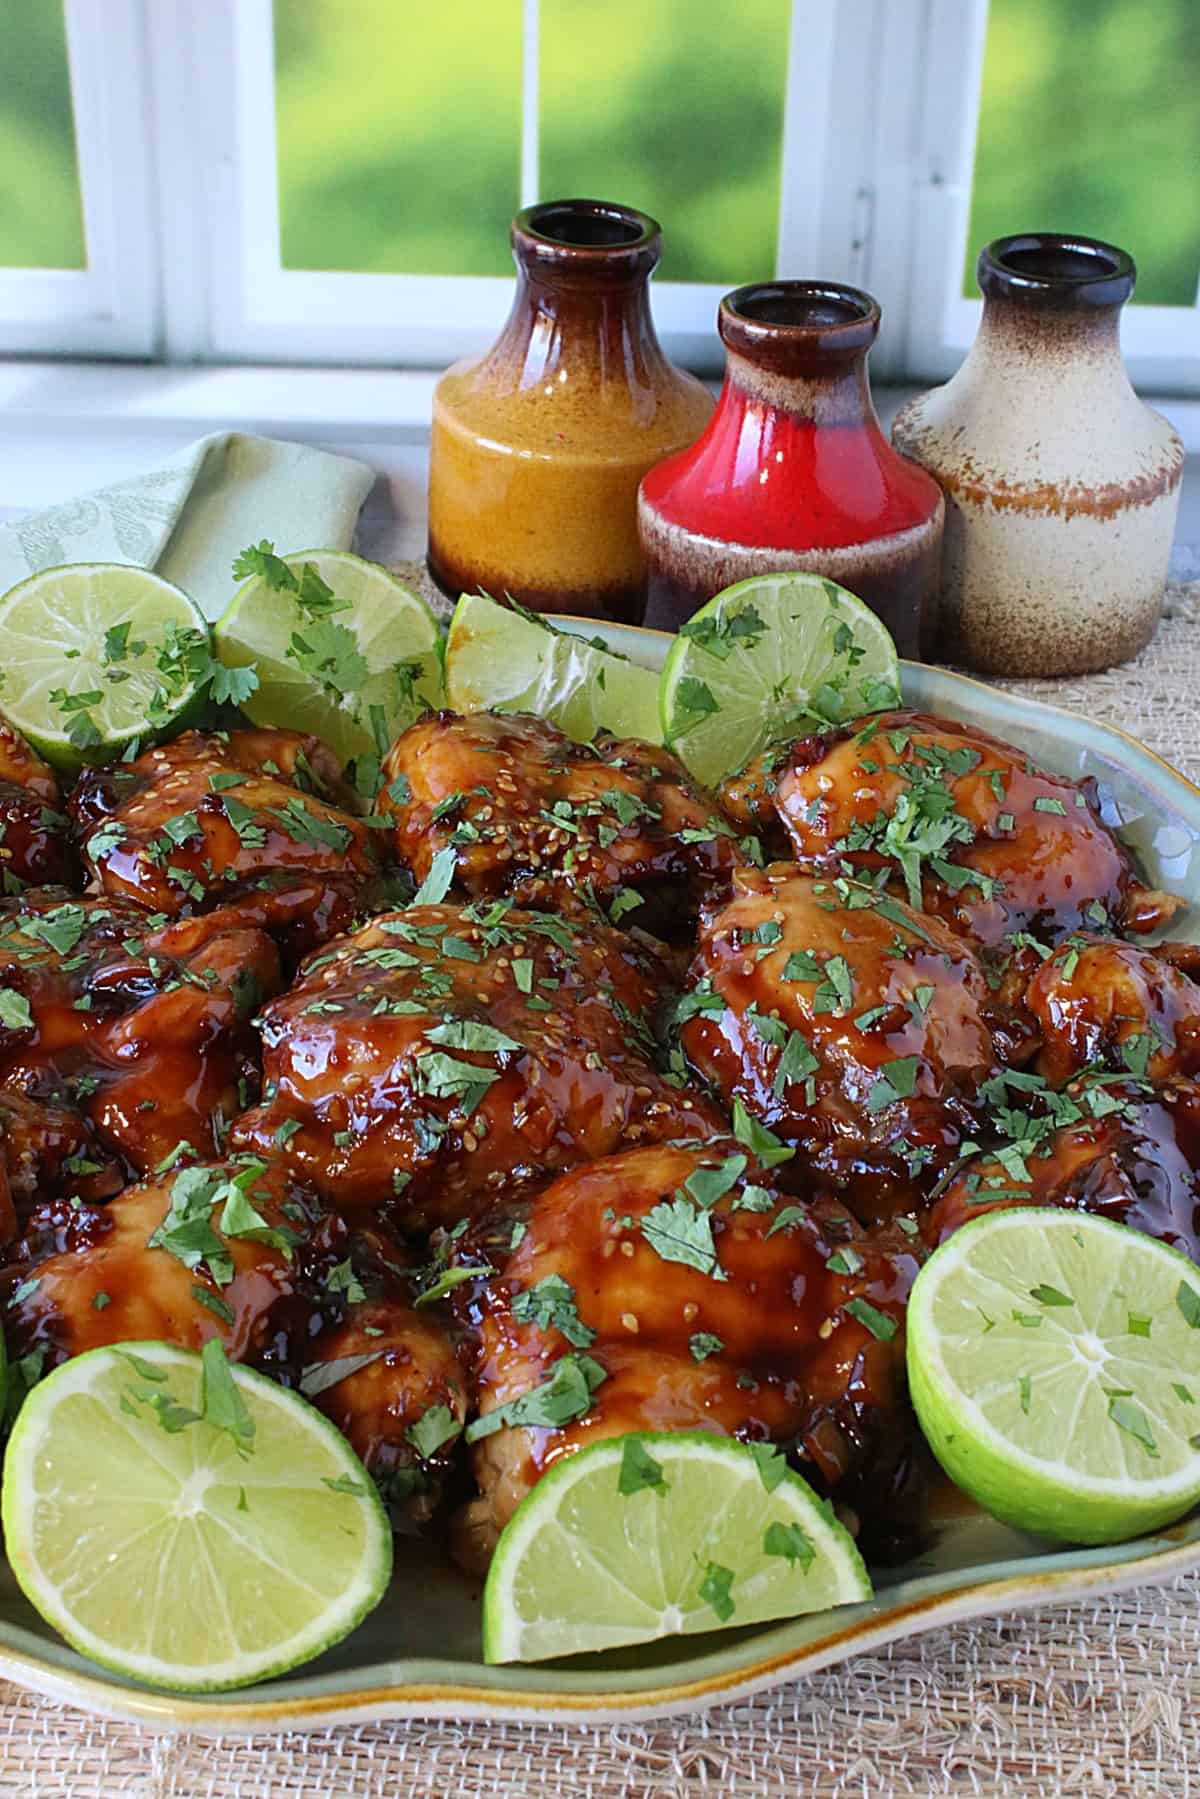 A platter filled with Teriyaki Glazed Chicken Thighs by a kitchen window.